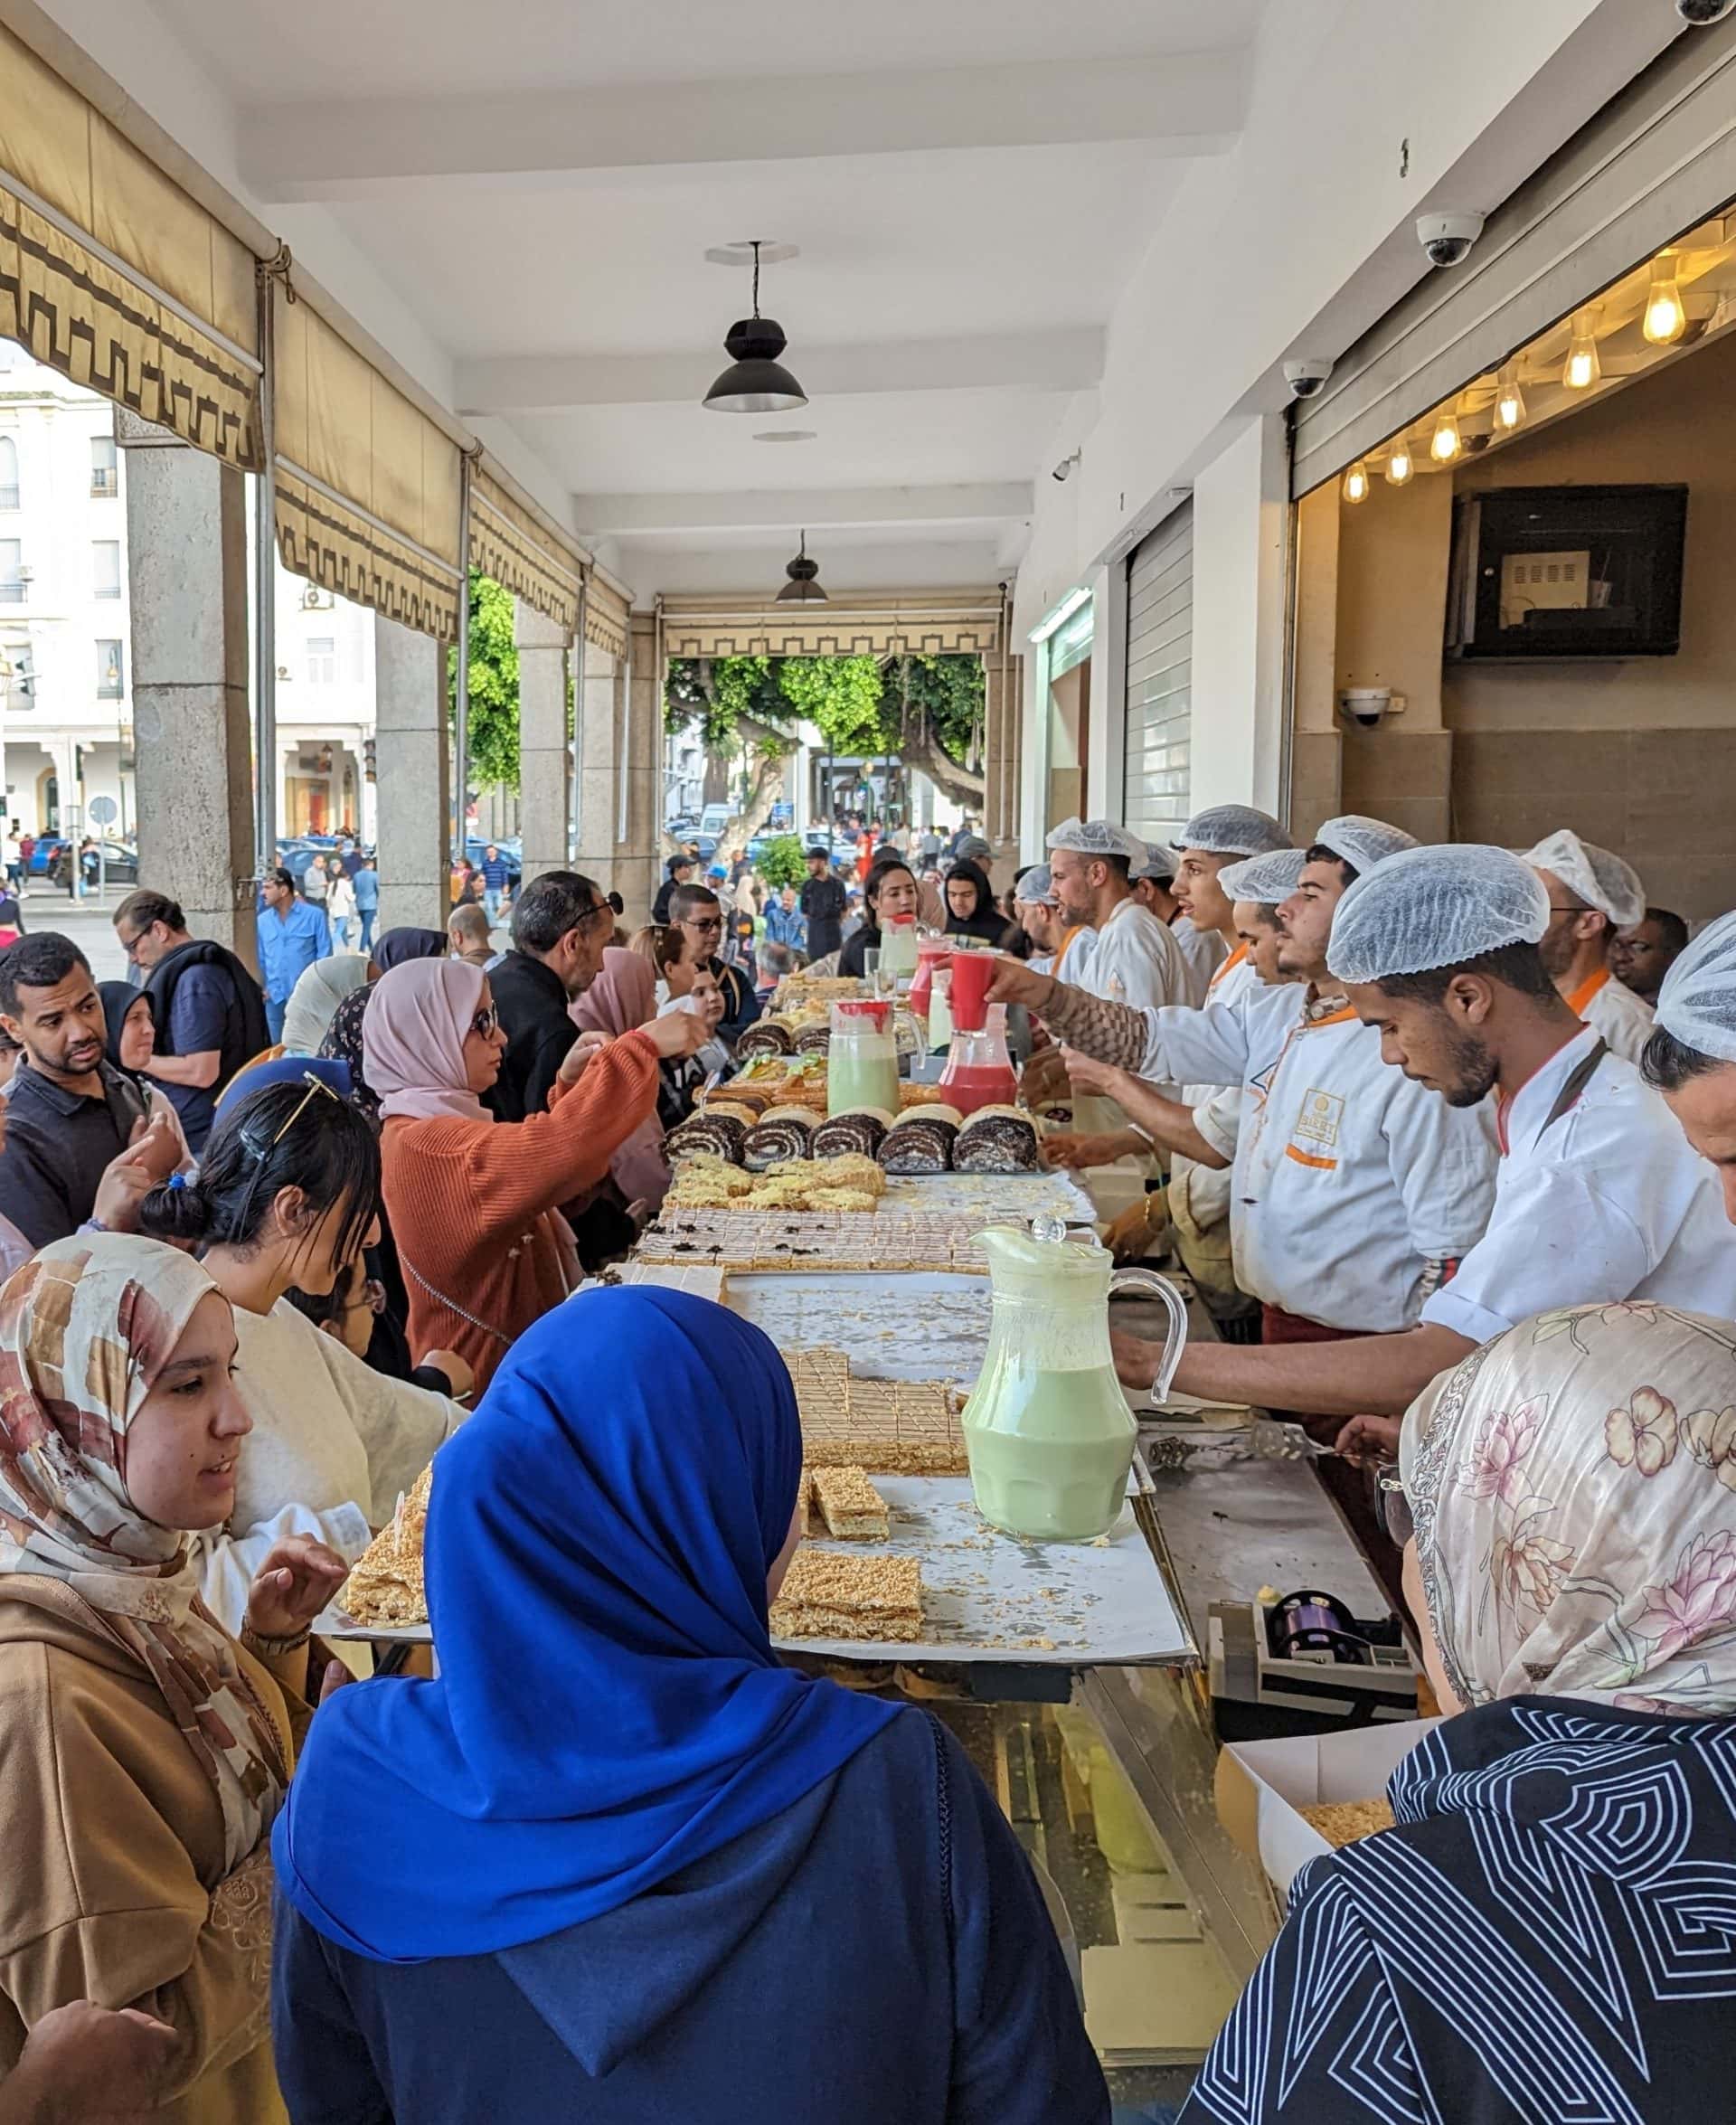 Citizens of Rabat crowding a French-influenced pastry stand.